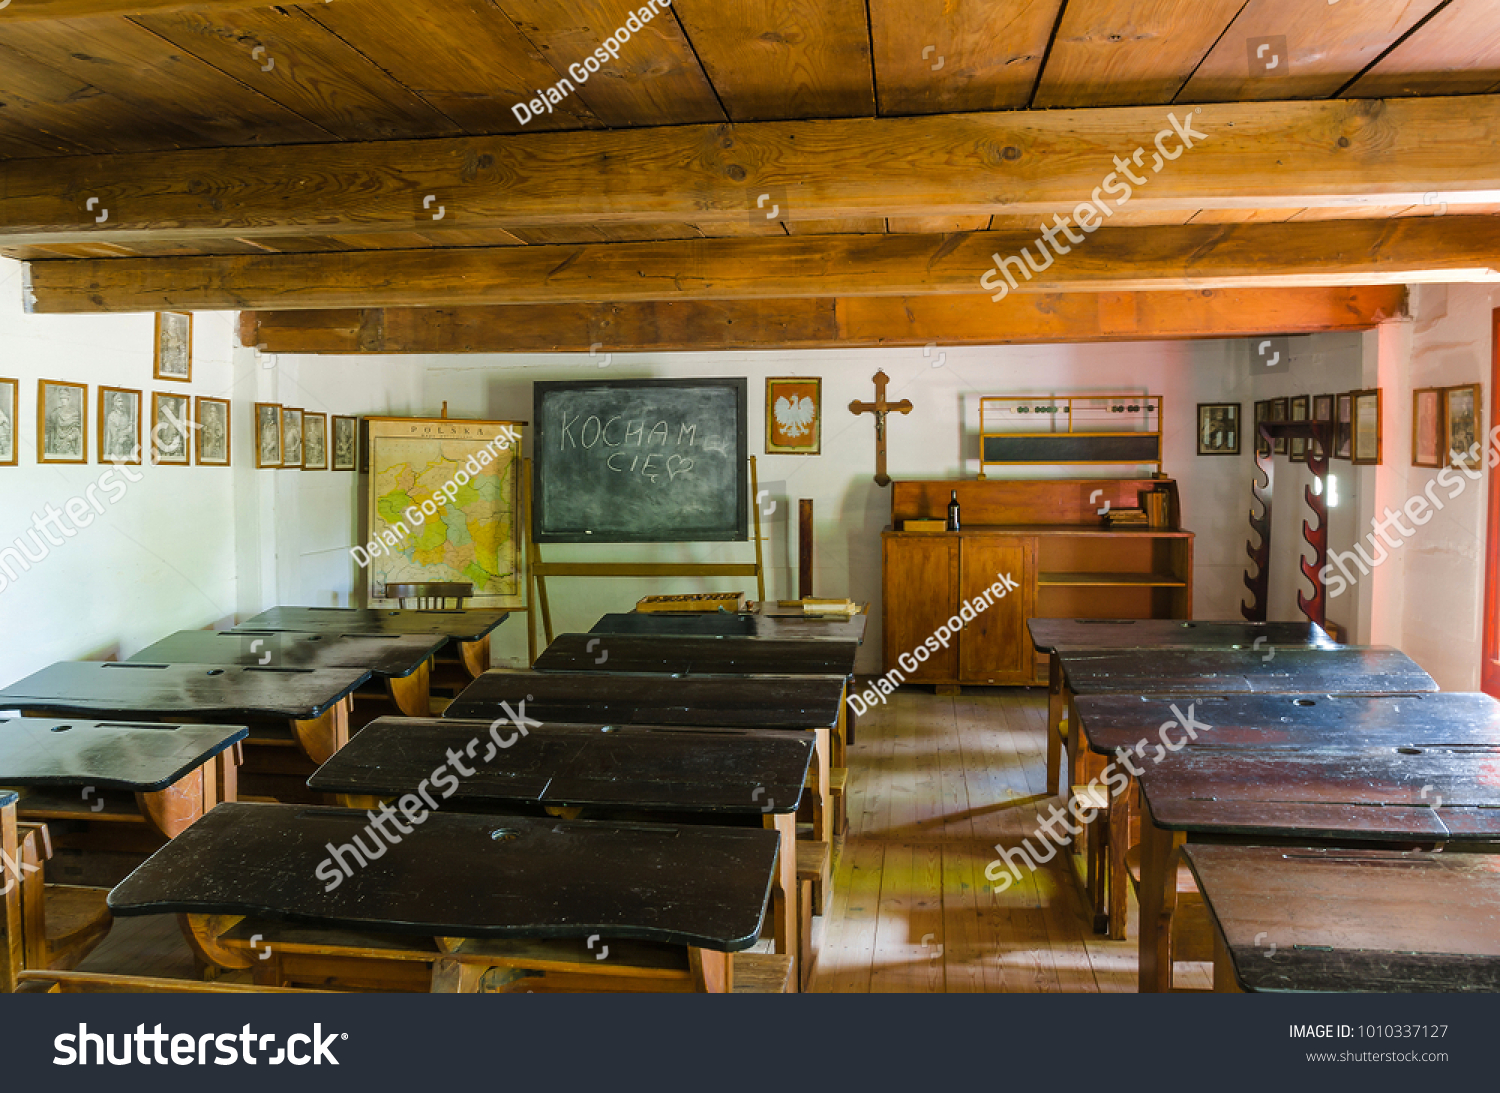 Maurzyce/Poland - June 15, 2015. Interior of a classroom located in the wooden cottage in the open-air museum in Maurzyce, Poland #1010337127